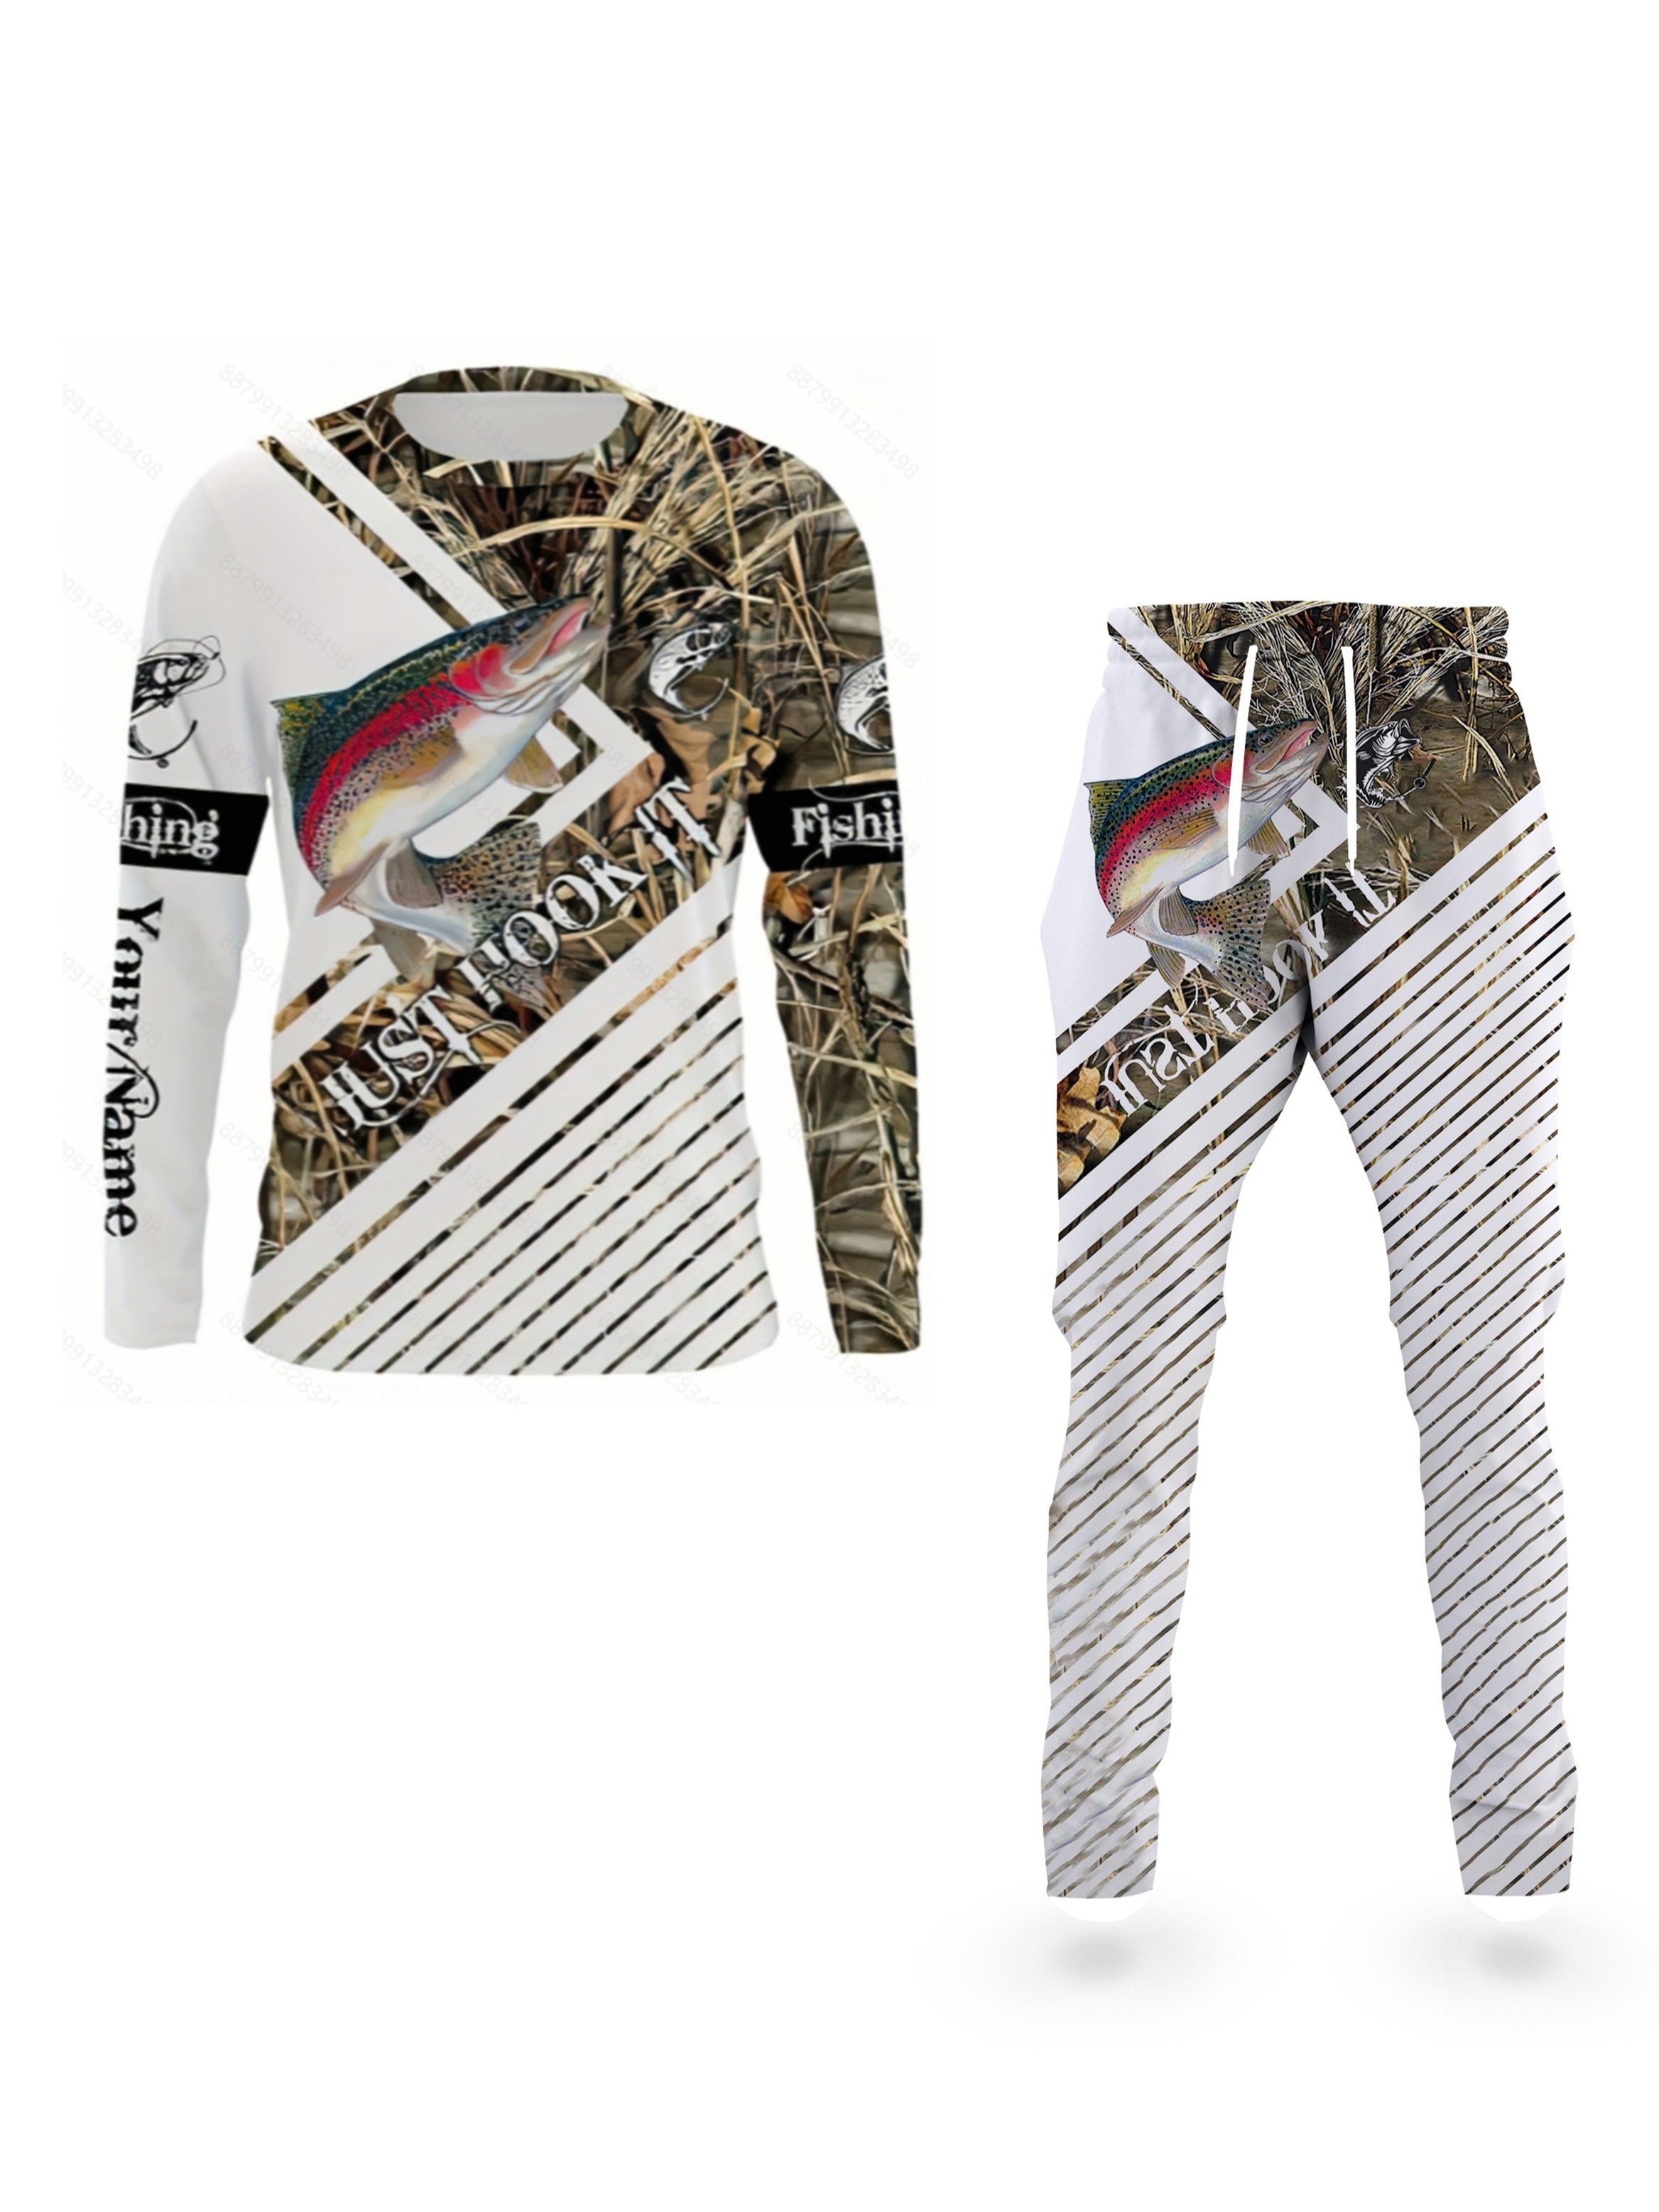 Cartoon Fish Print Long Sleeve Fishing Shirts & Pants For Men, 2pieces  Novelty Pjs Tops Pullovers Tops & Trousers Set, Men's Trendy Clothing